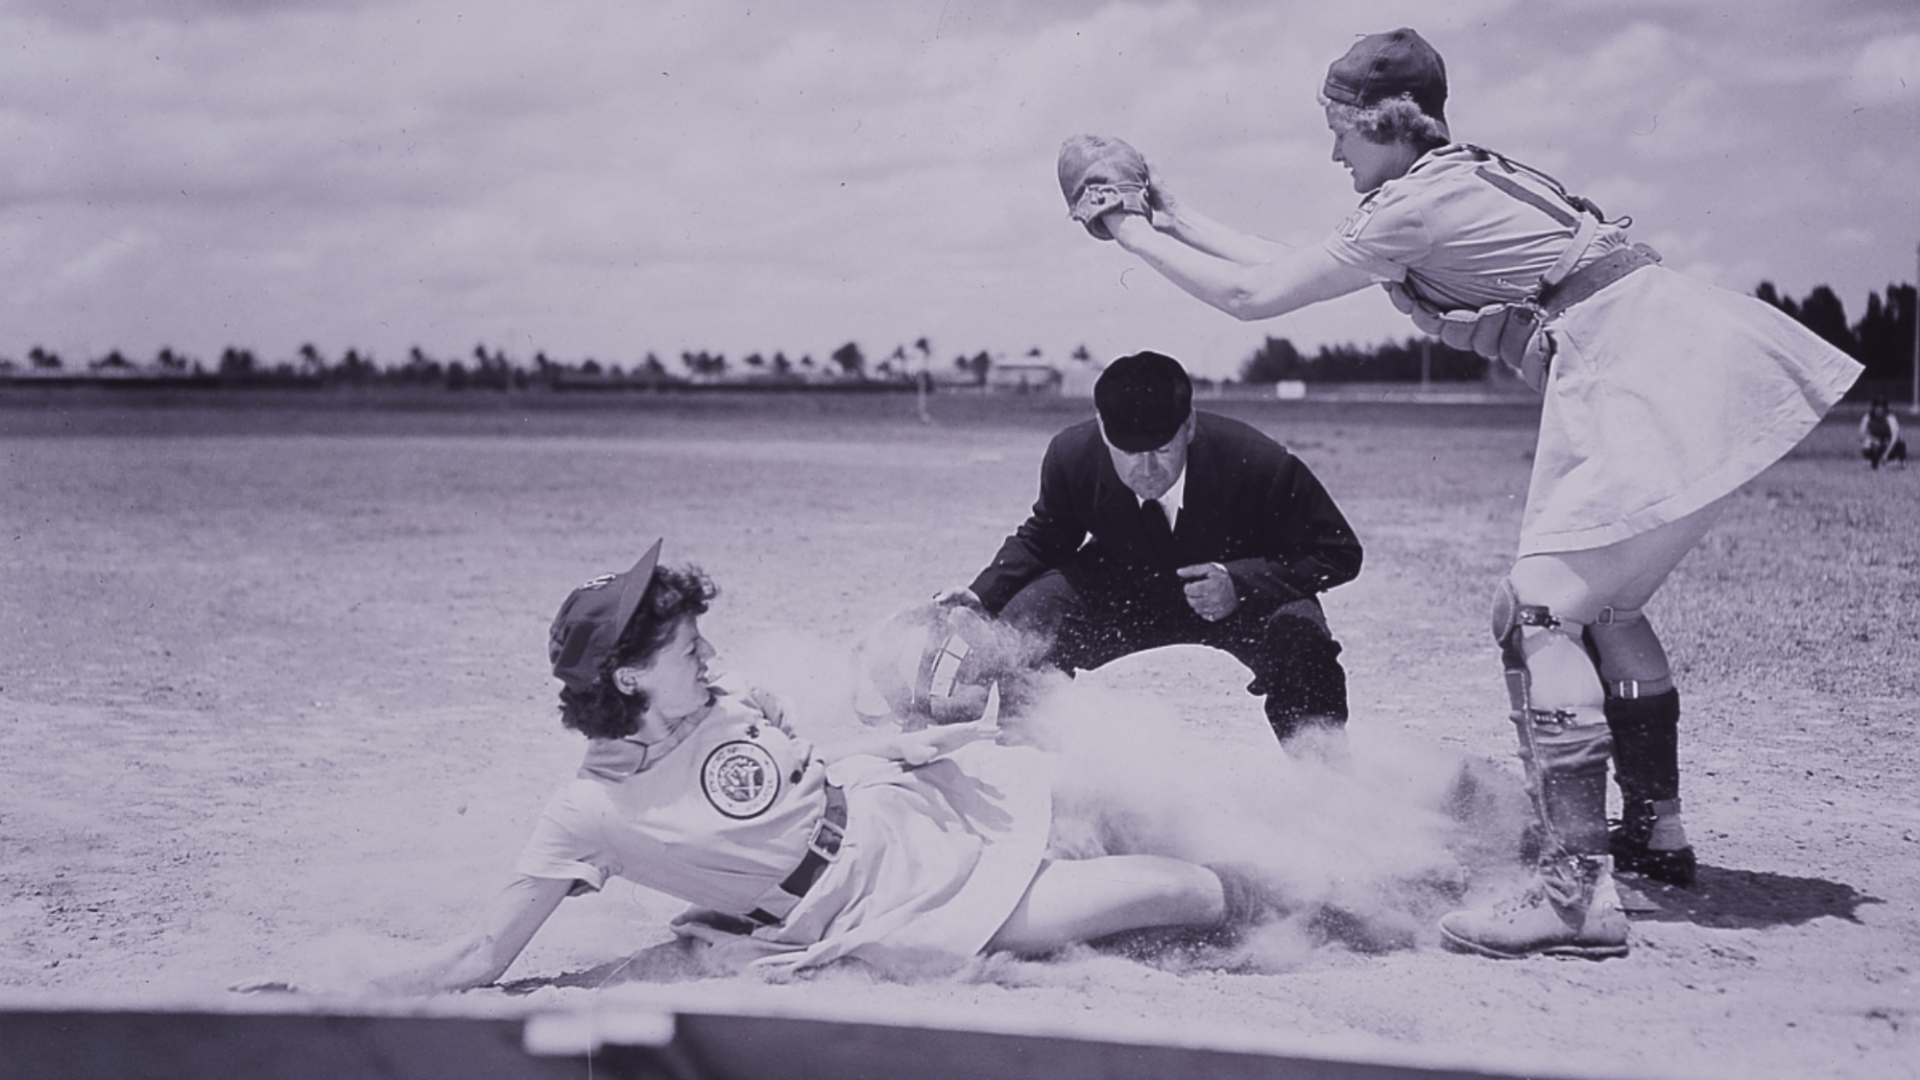 Two women playing baseball. One sliding into a base while the other catches the ball. An umpire stands behind them to make a call on the play.